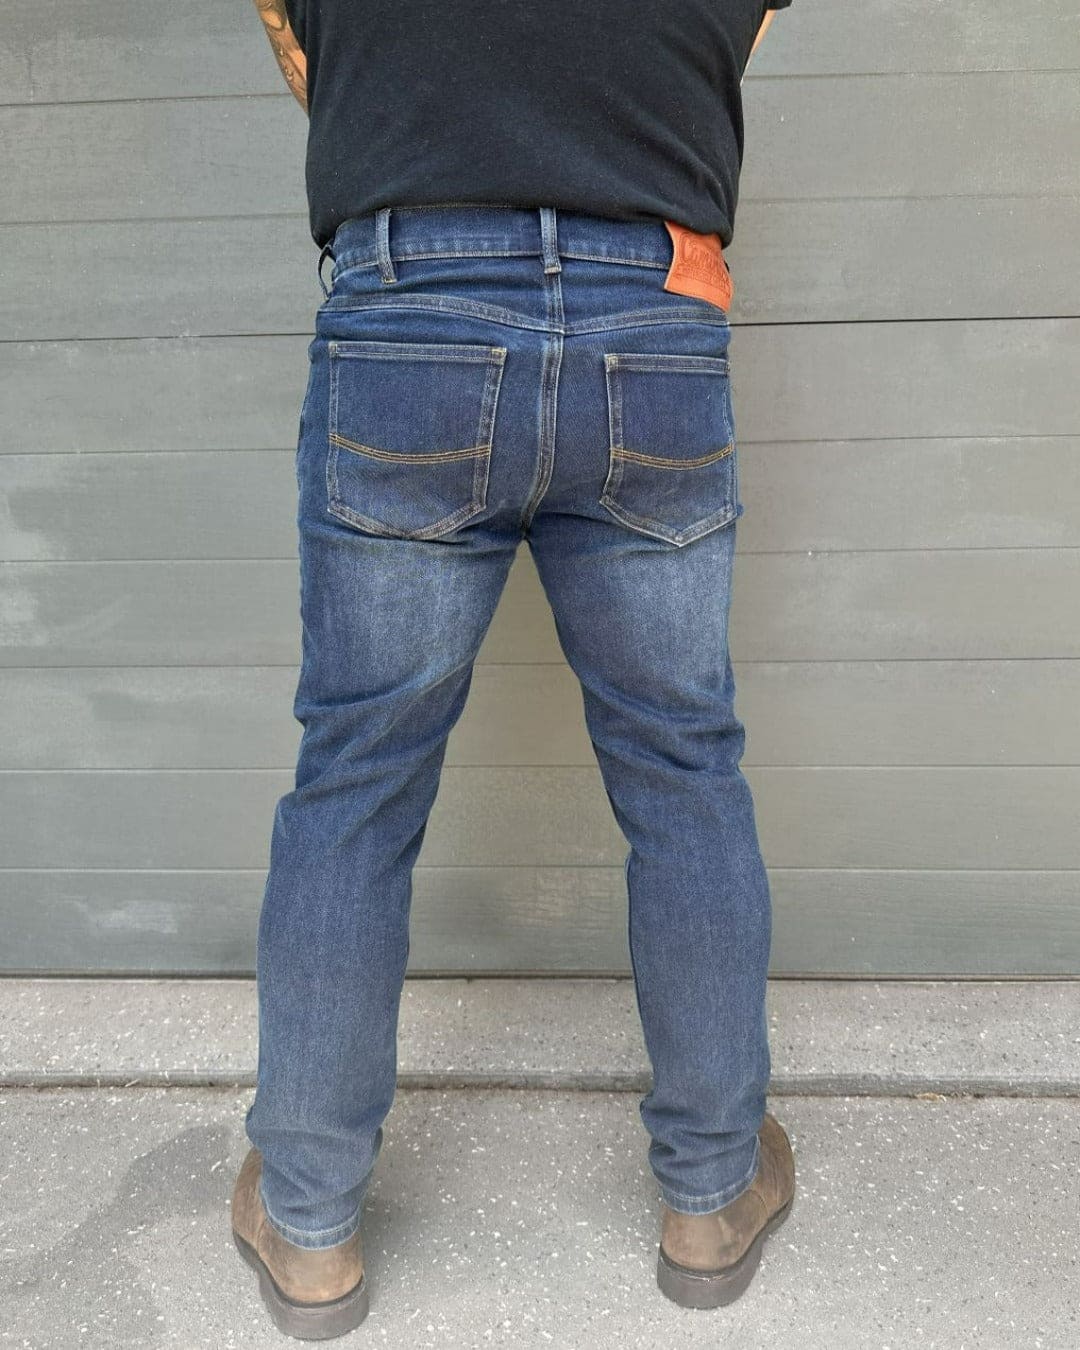 Camino | Calix Motorcycle Jeans Single Layer Armalith Regular Fit (Armour Pockets)